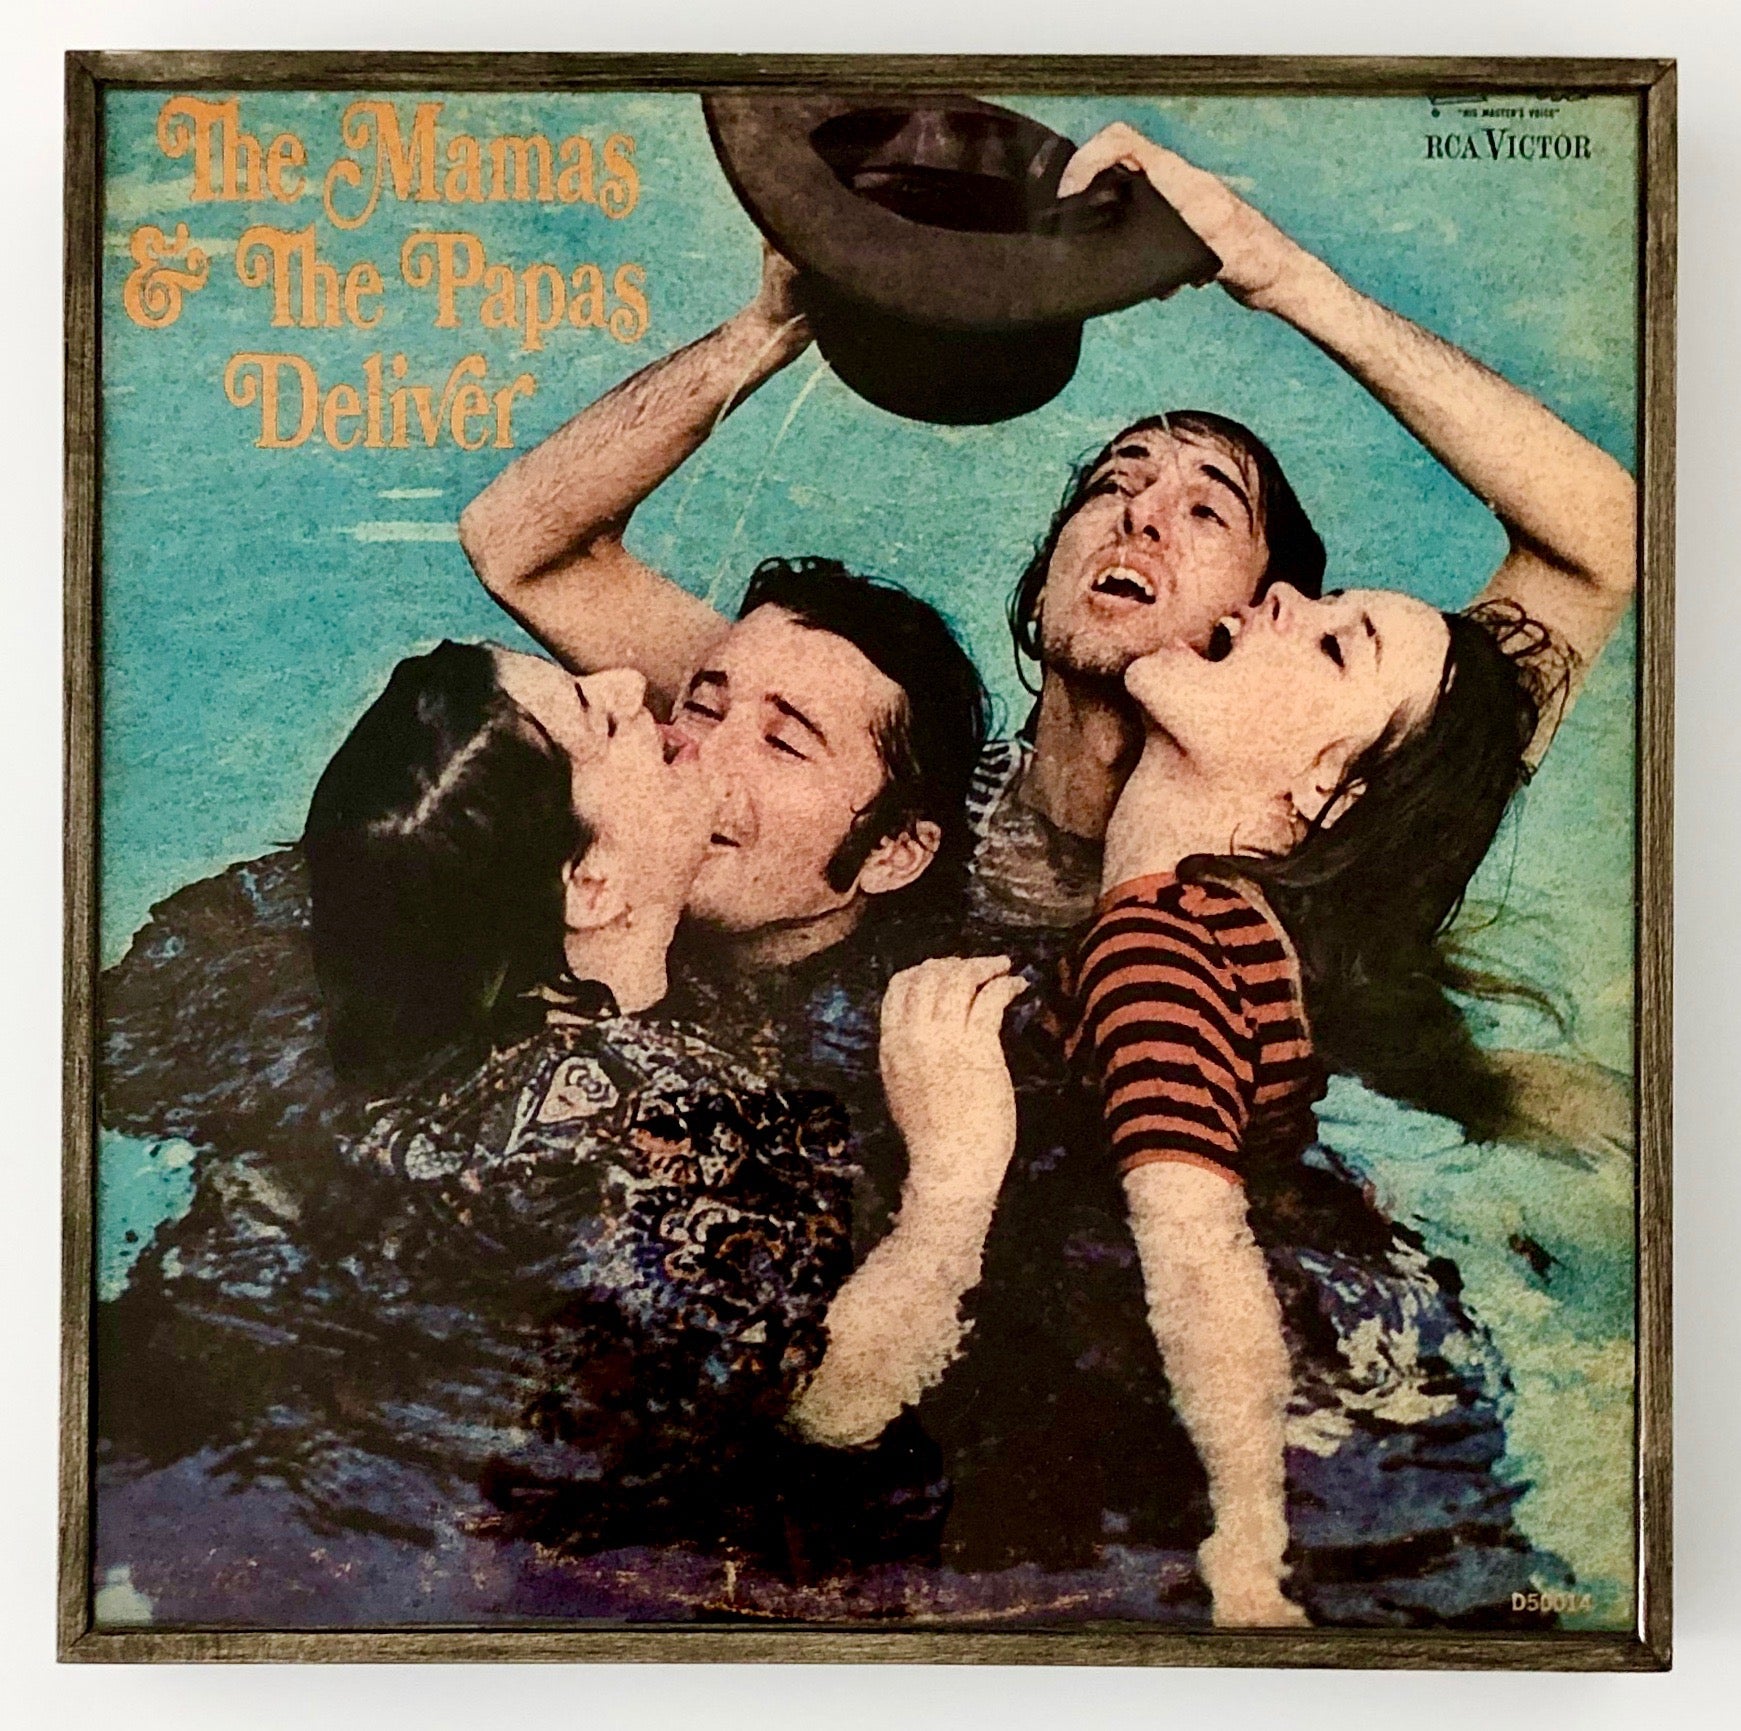 MAMAS AND THE PAPAS - Deliver